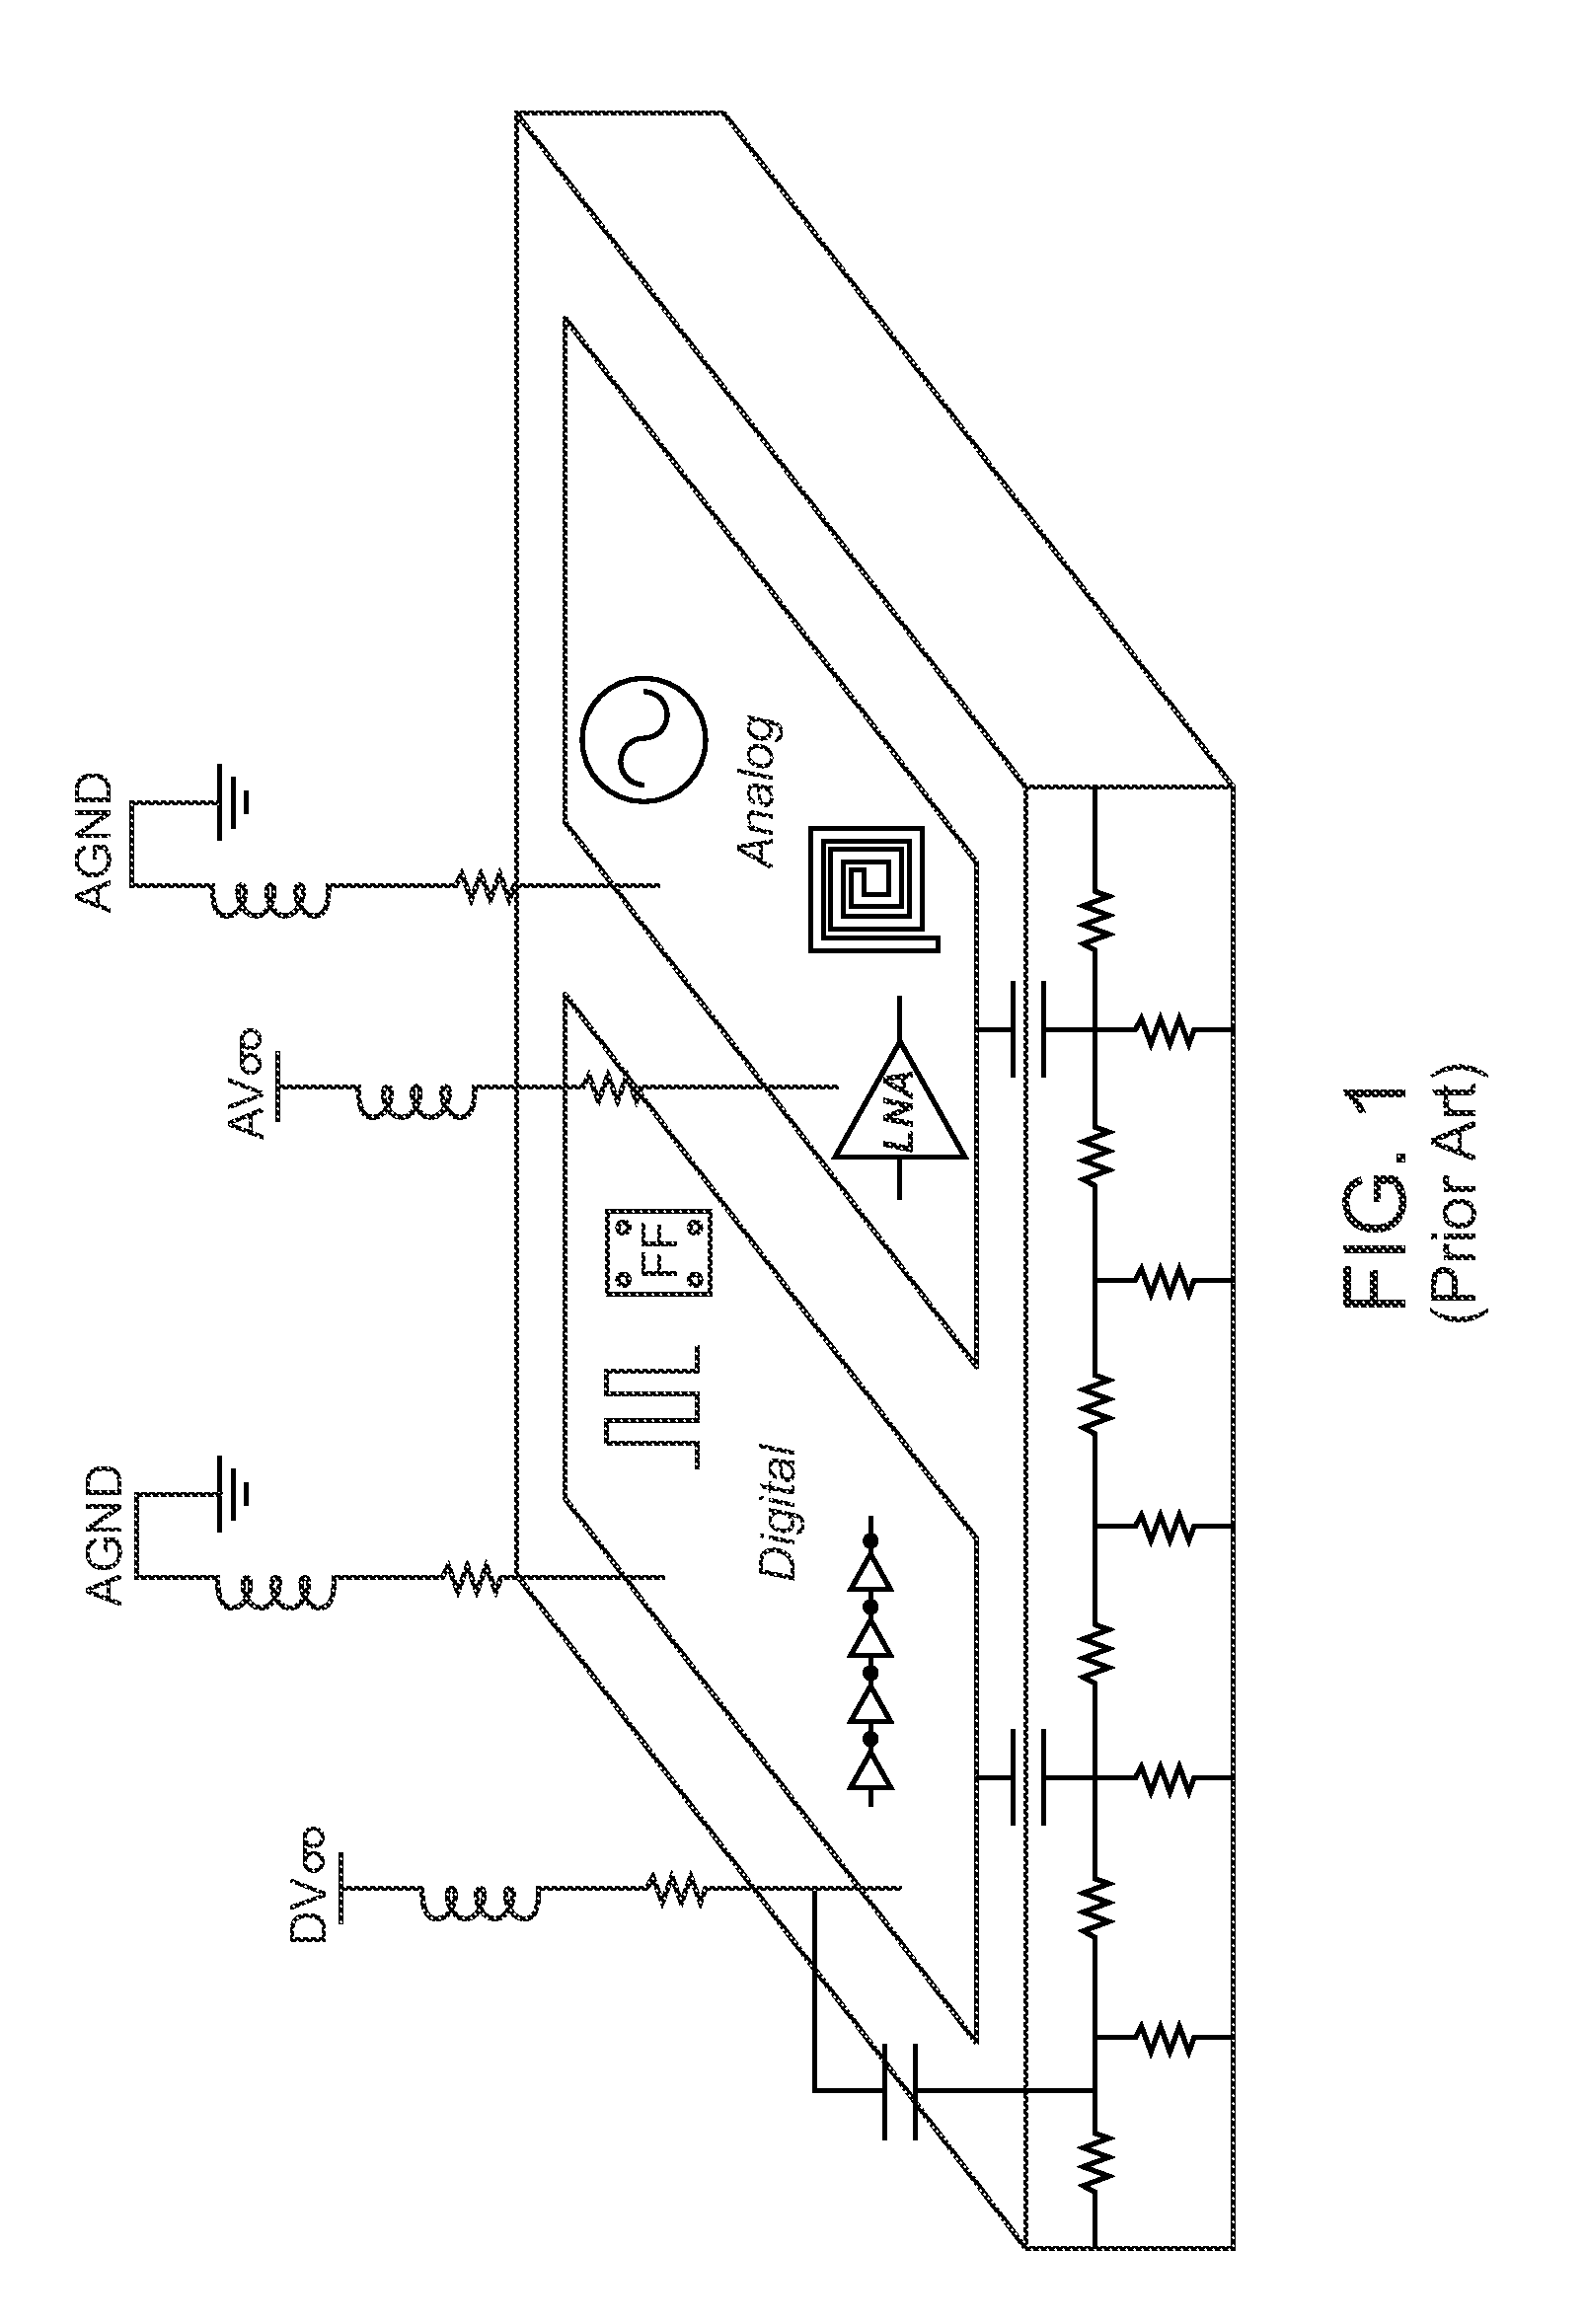 Method and apparatus for substrate noise aware floor planning for integrated circuit design